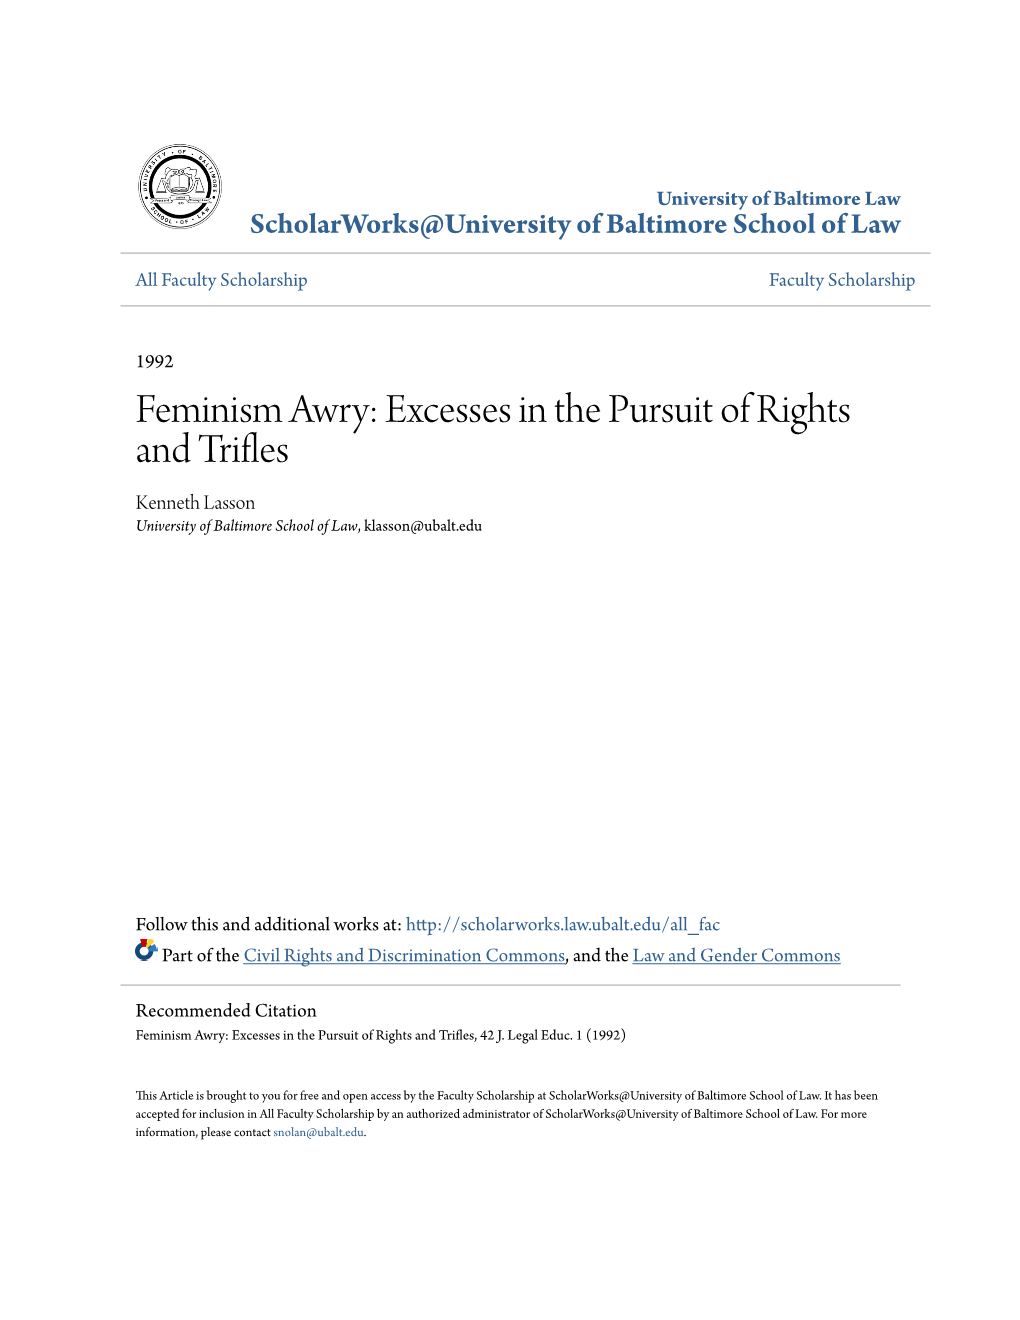 Feminism Awry: Excesses in the Pursuit of Rights and Trifles Kenneth Lasson University of Baltimore School of Law, Klasson@Ubalt.Edu